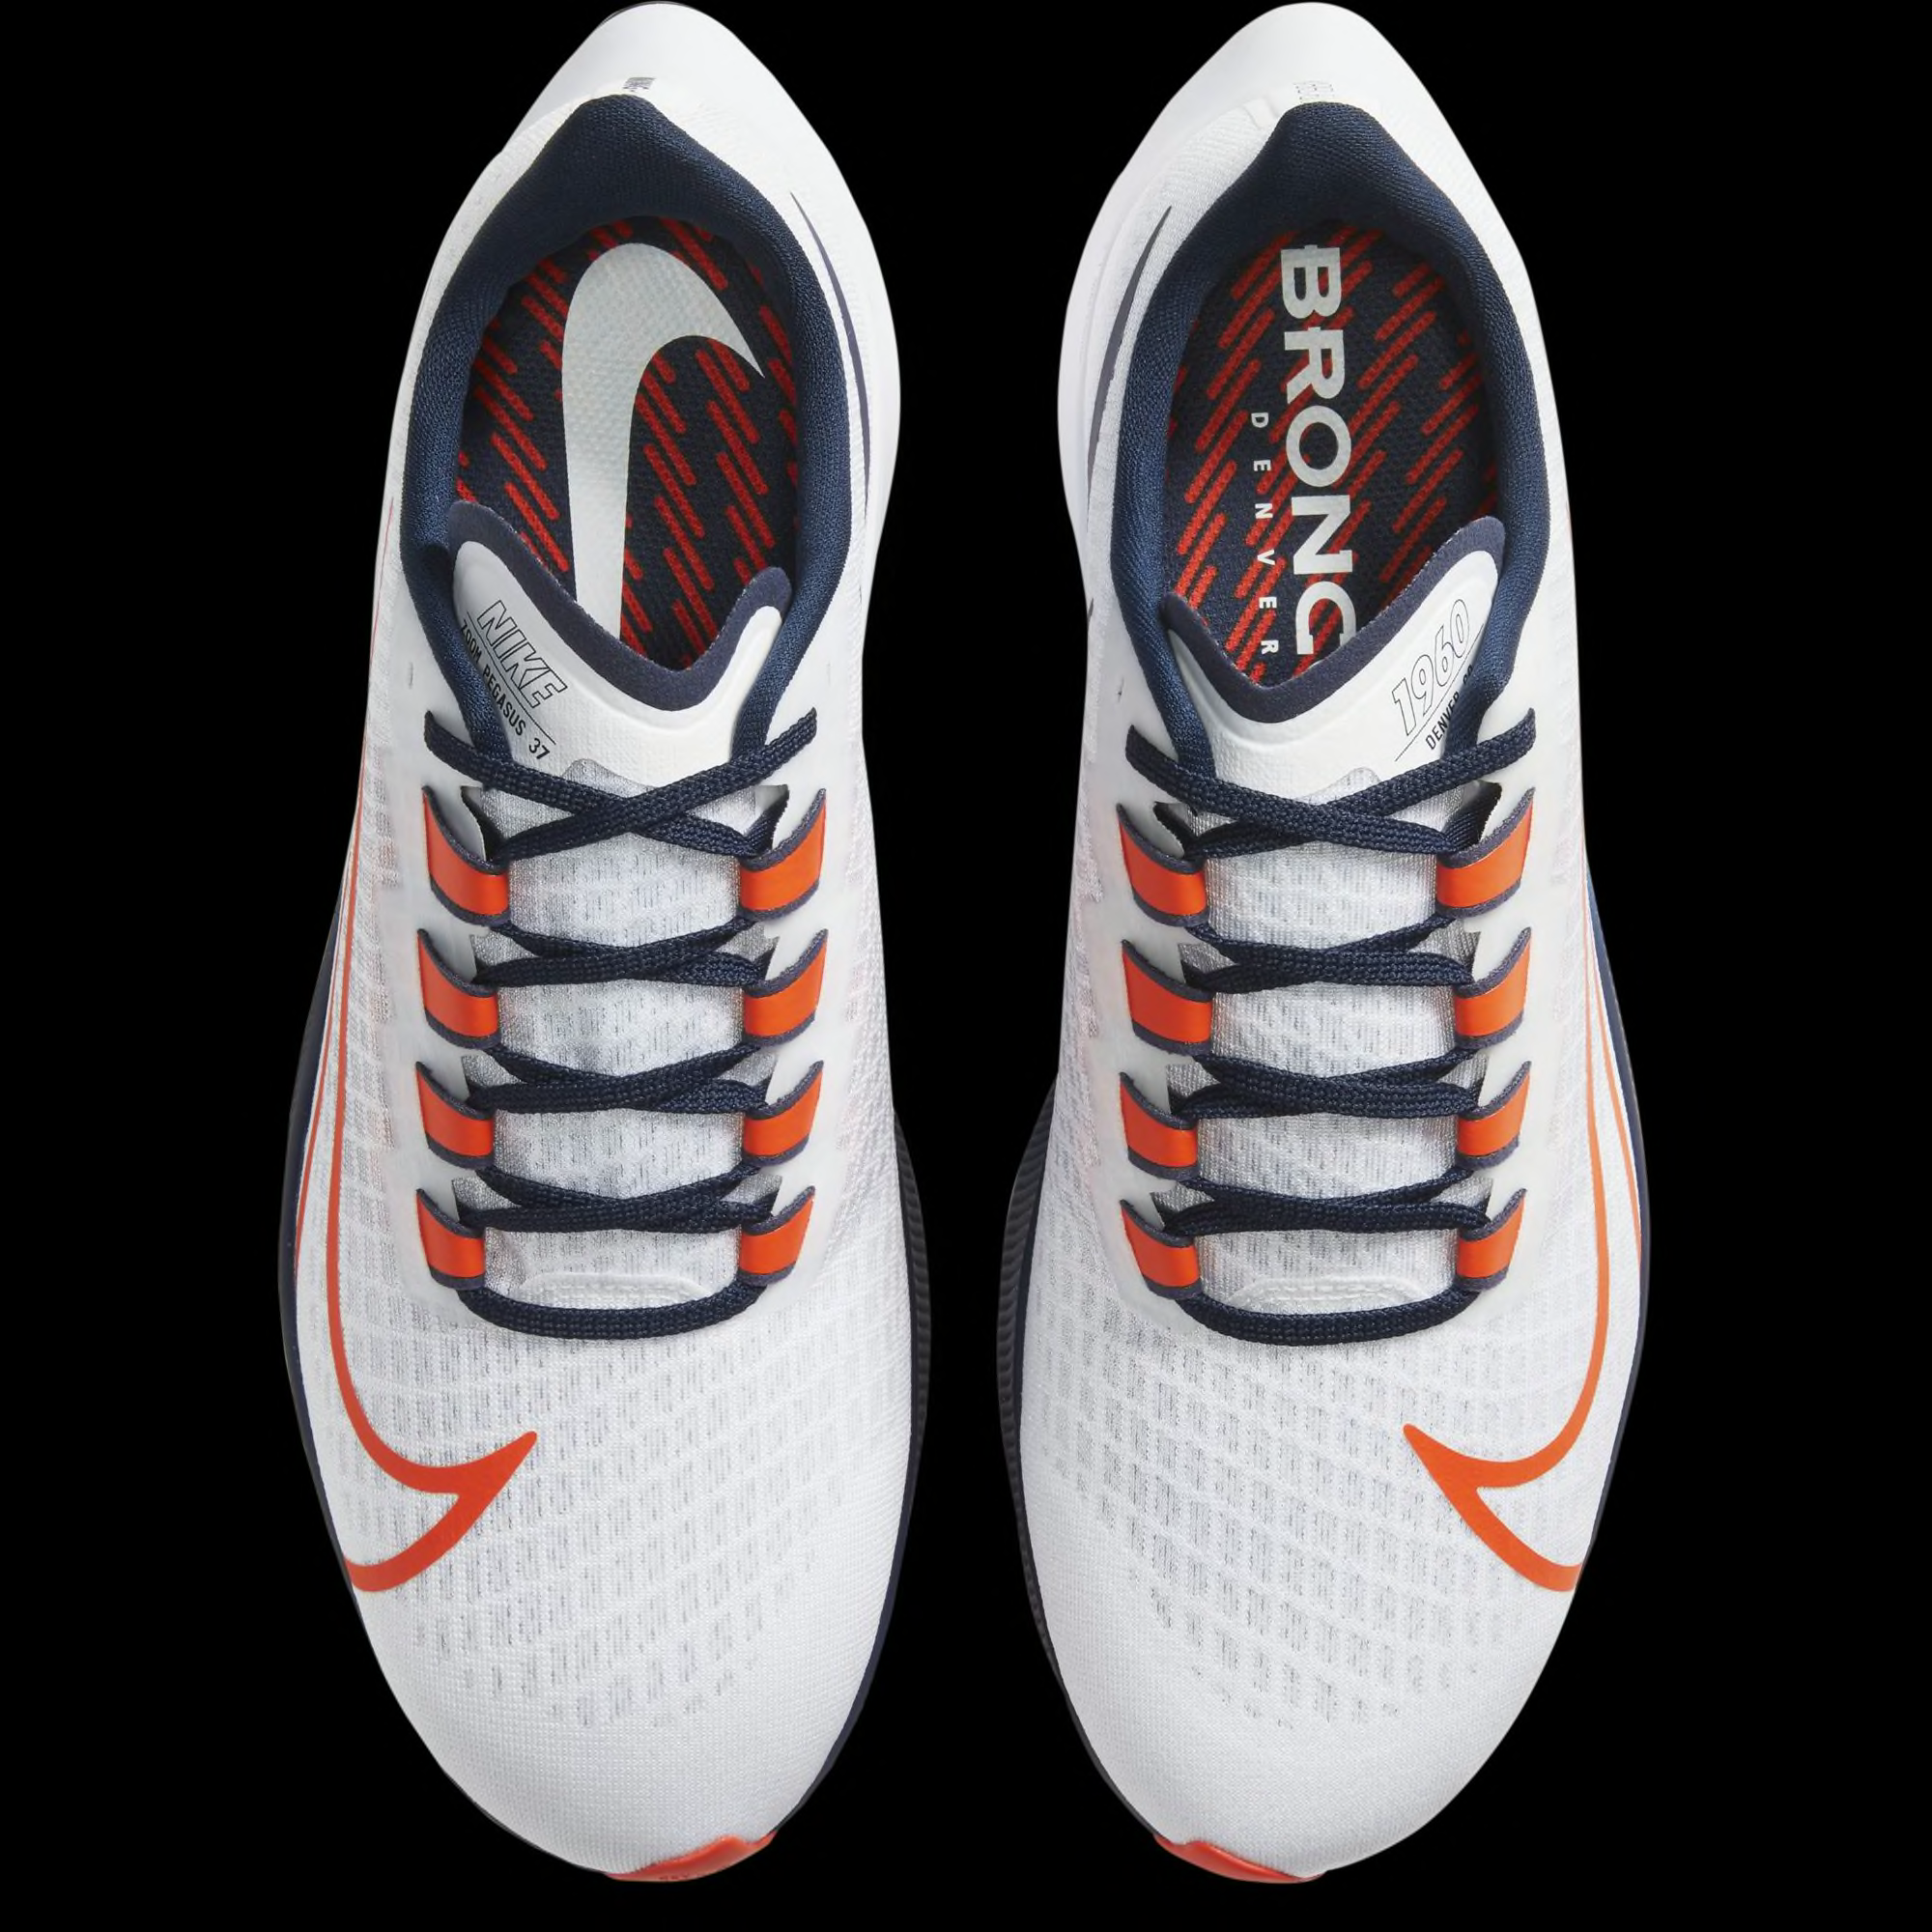 Check out these amazing Denver Broncos Nike running shoes